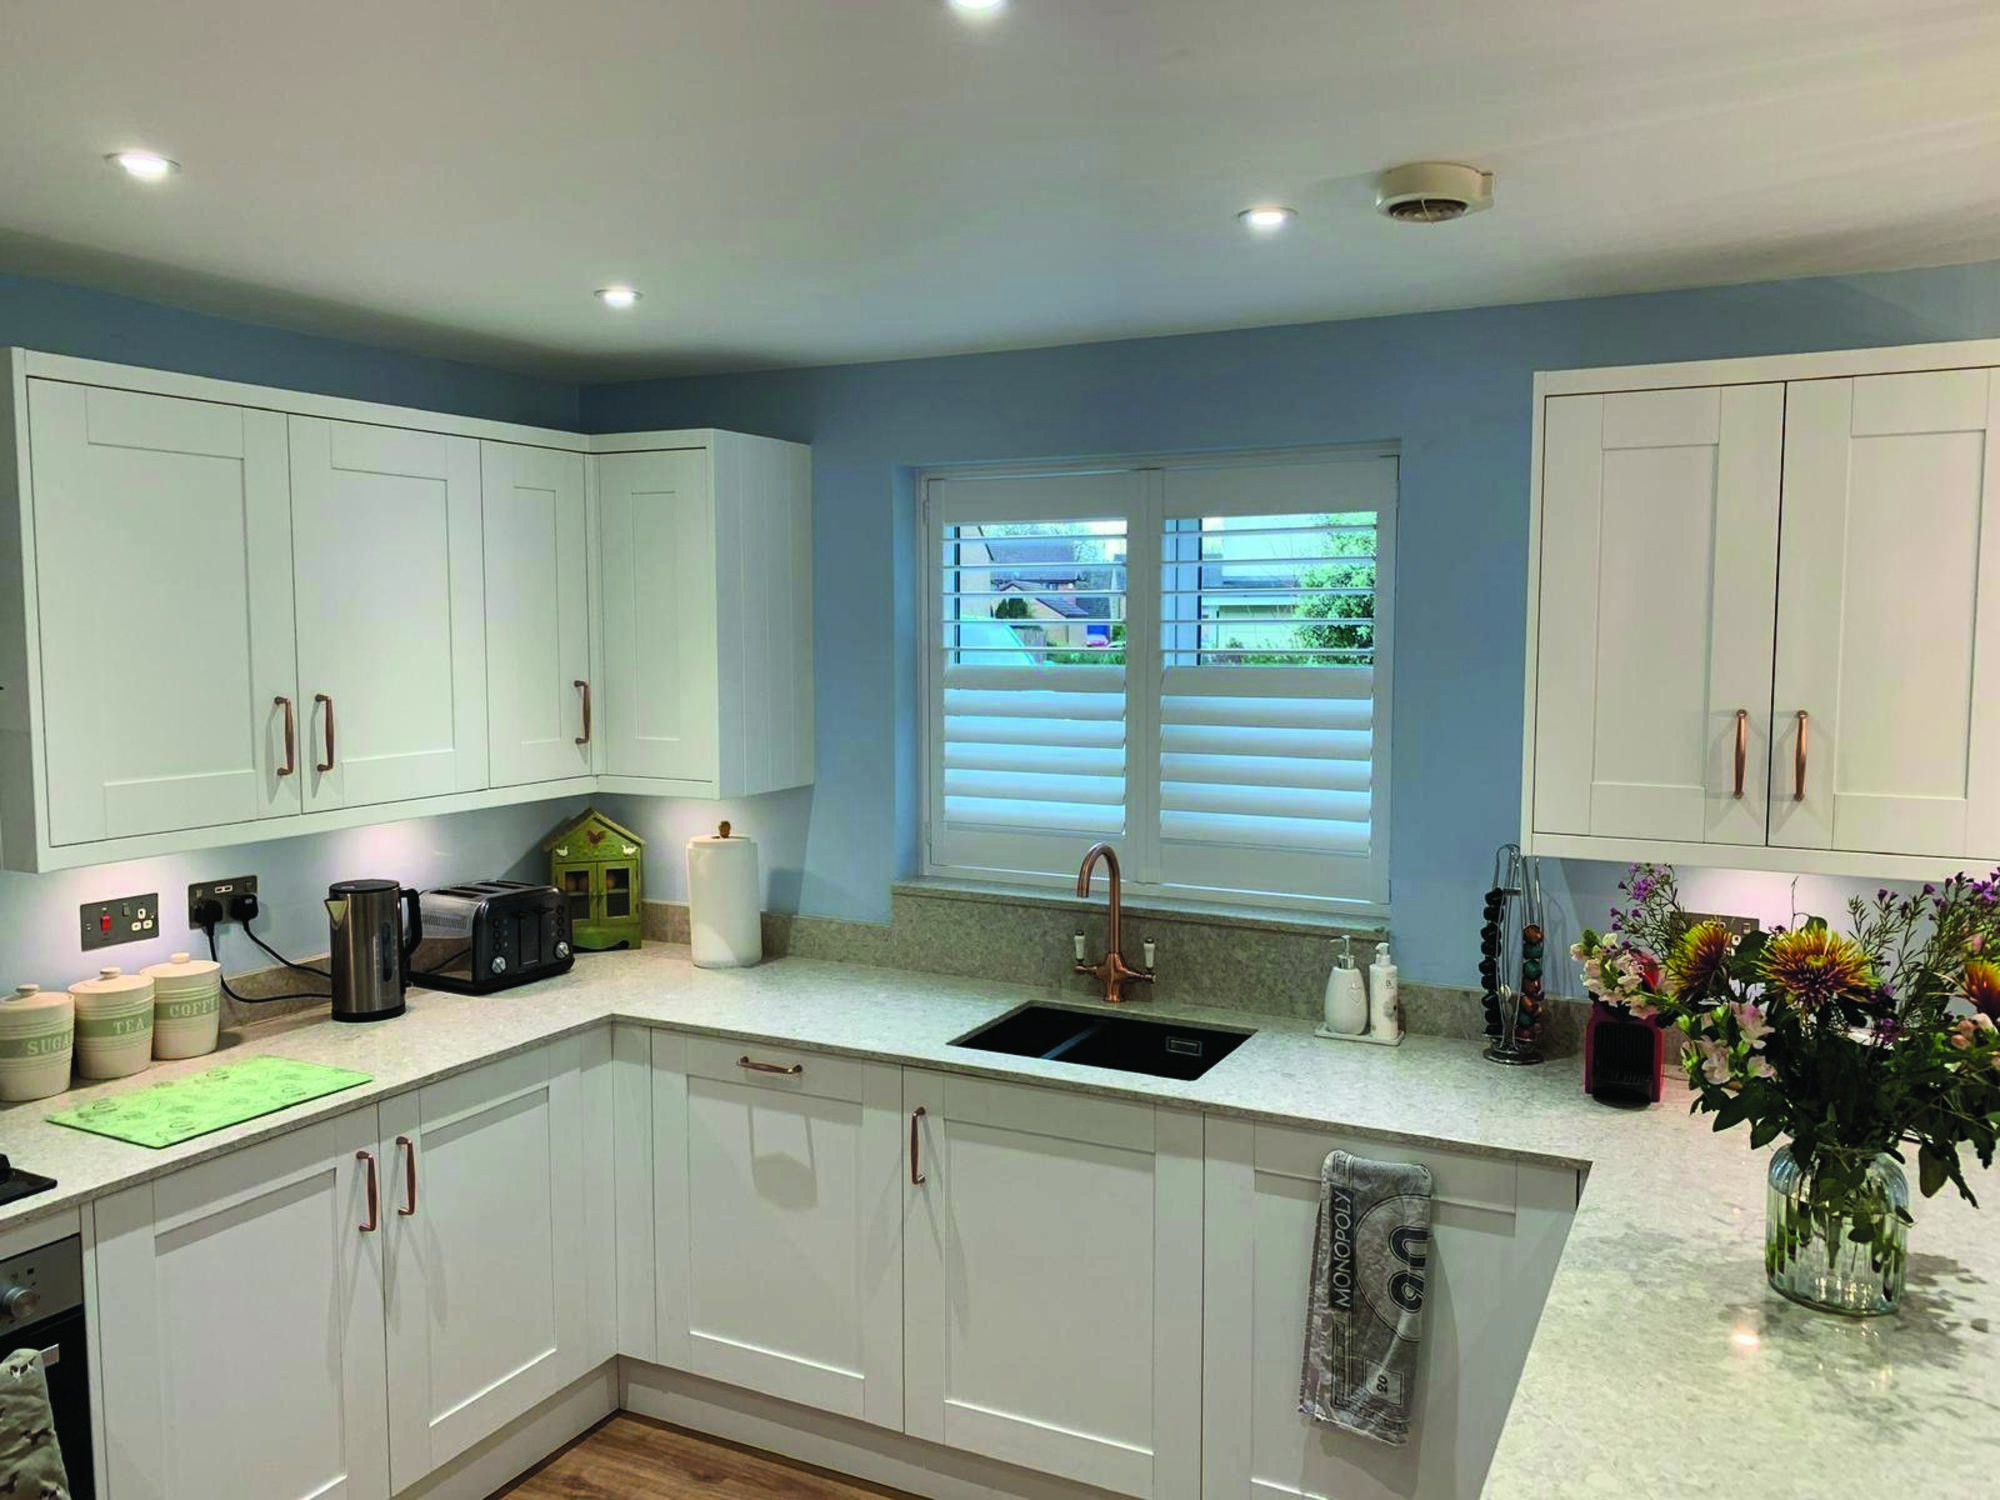 Full Height Shutters in Kitchen